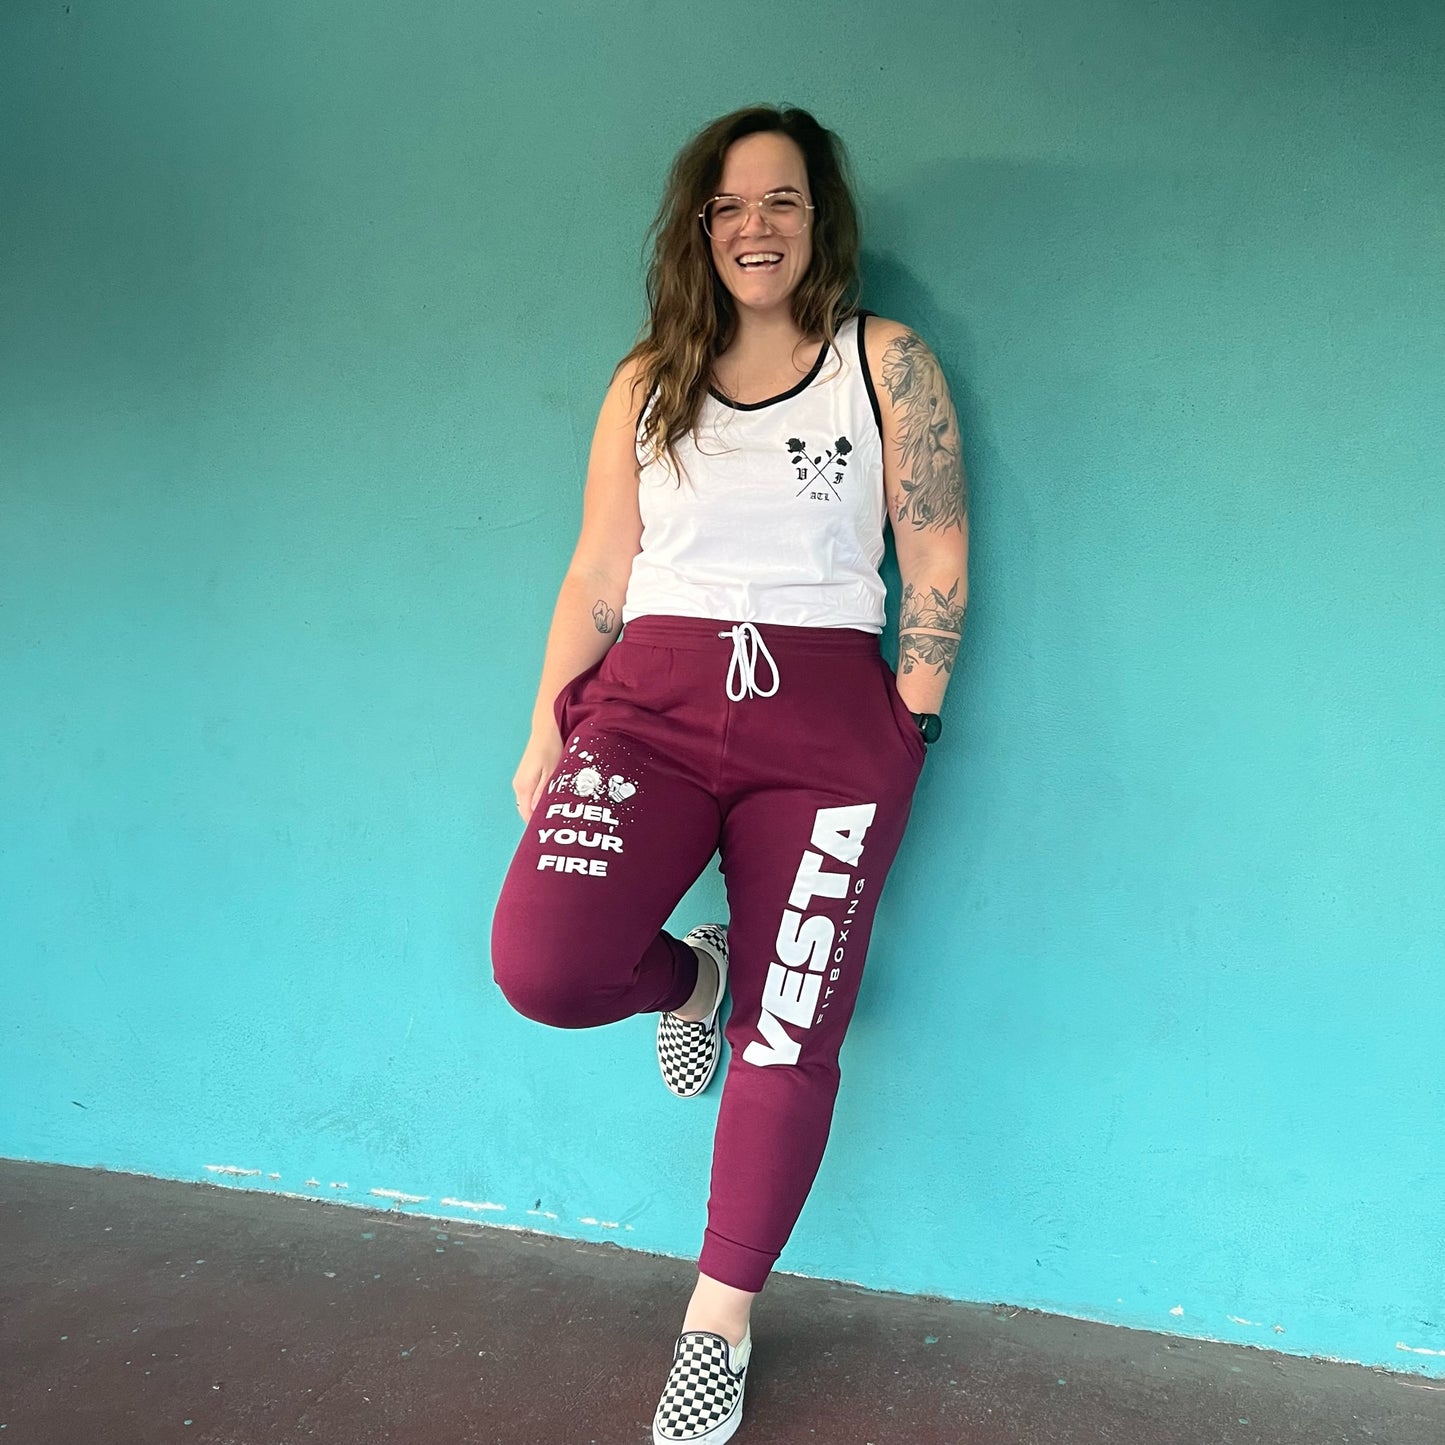 VESTA Fitboxing Fuel Your Fire Jogger